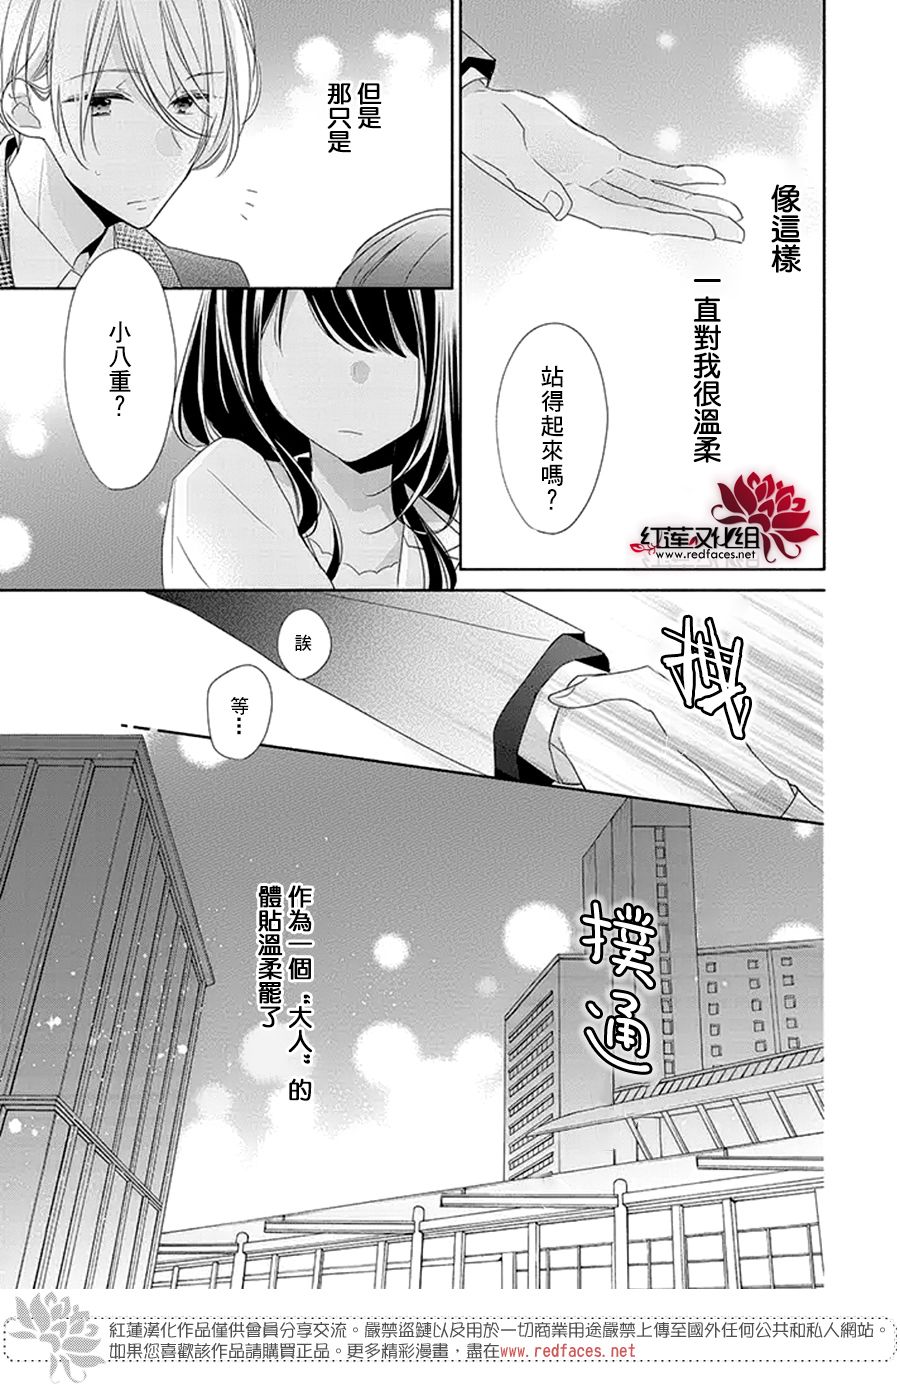 If given a second chance - 21話 - 5